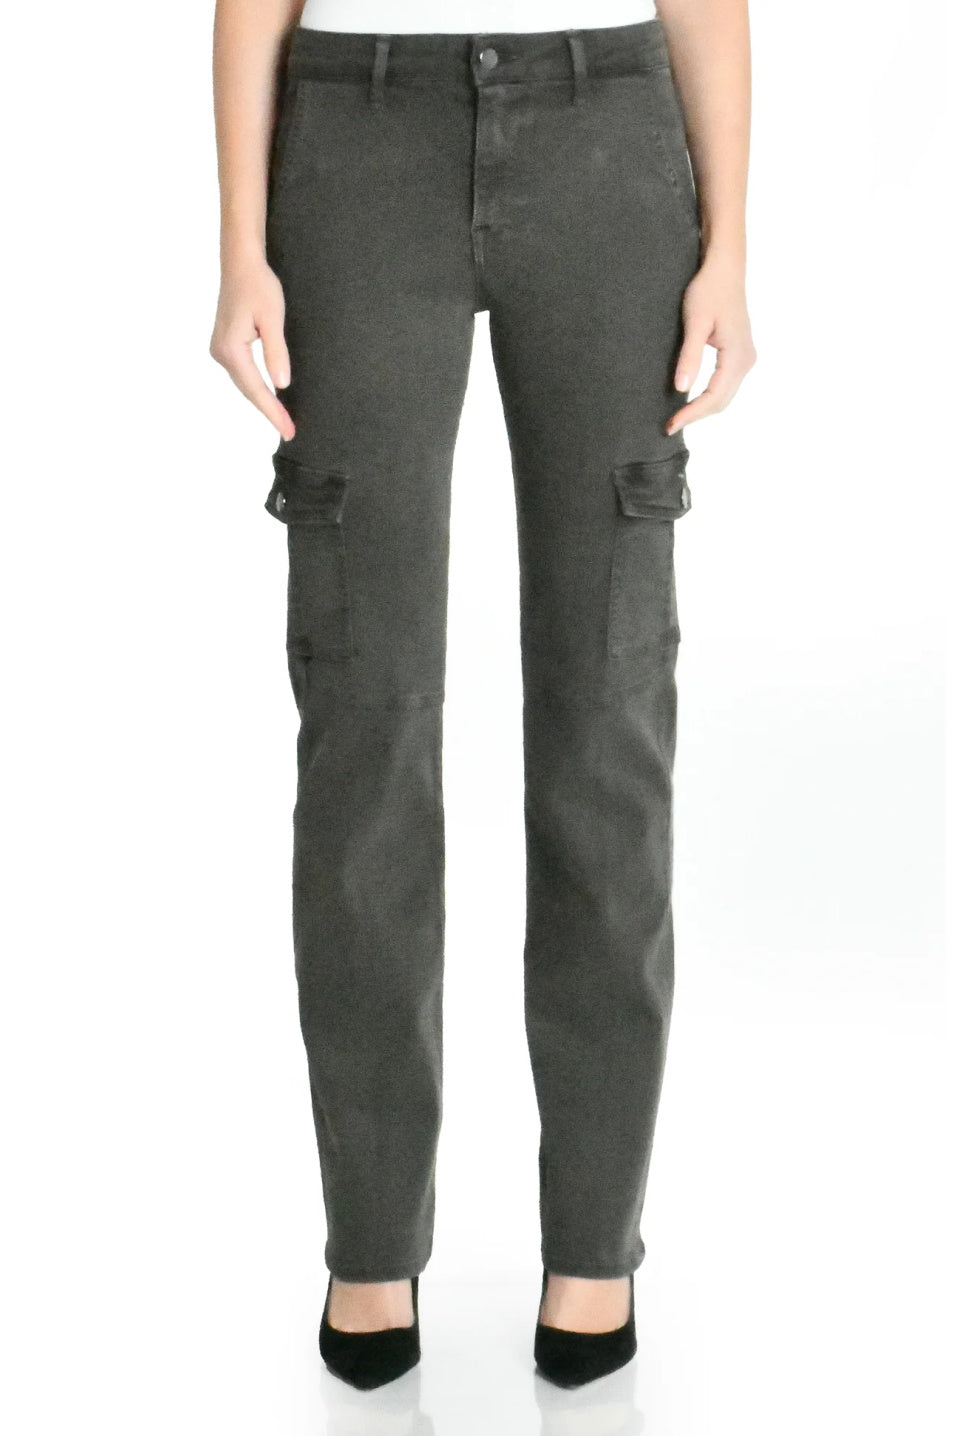 Fidelity Panther Cargo Pant (Deep Sage)